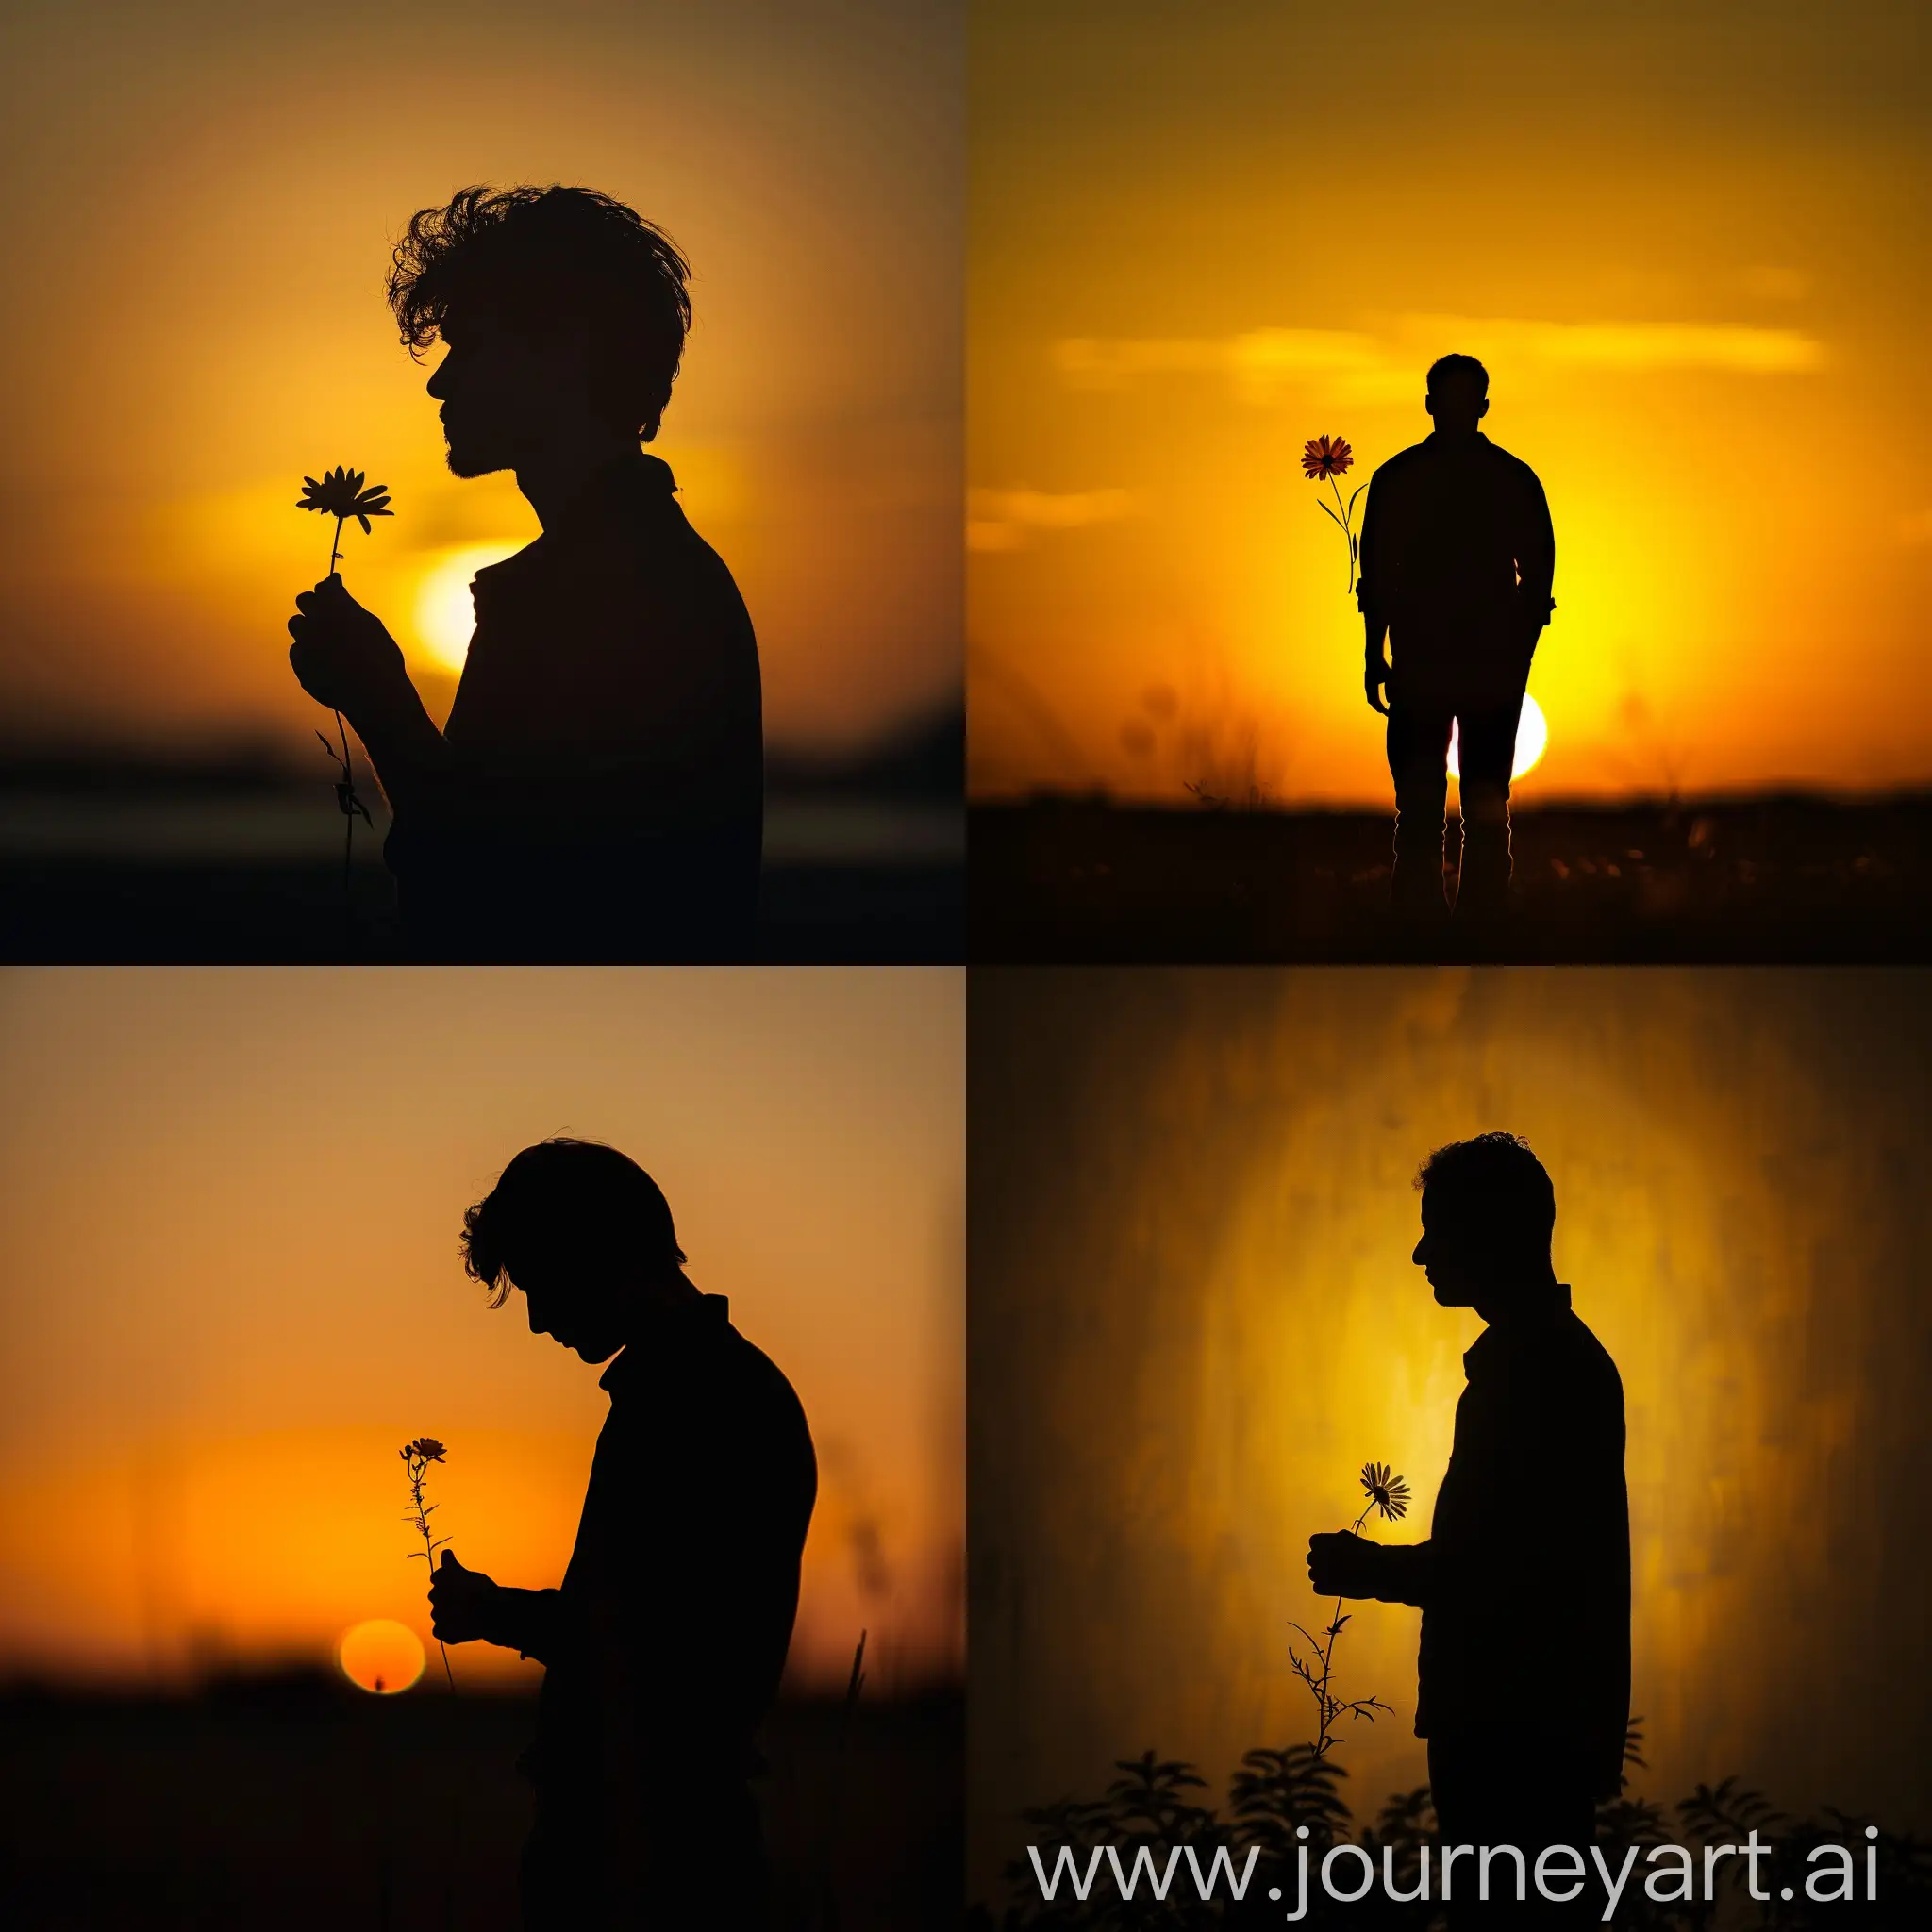 25 year men standing and holding a flower , background plain yellow sunset , dark black sbject , potrait